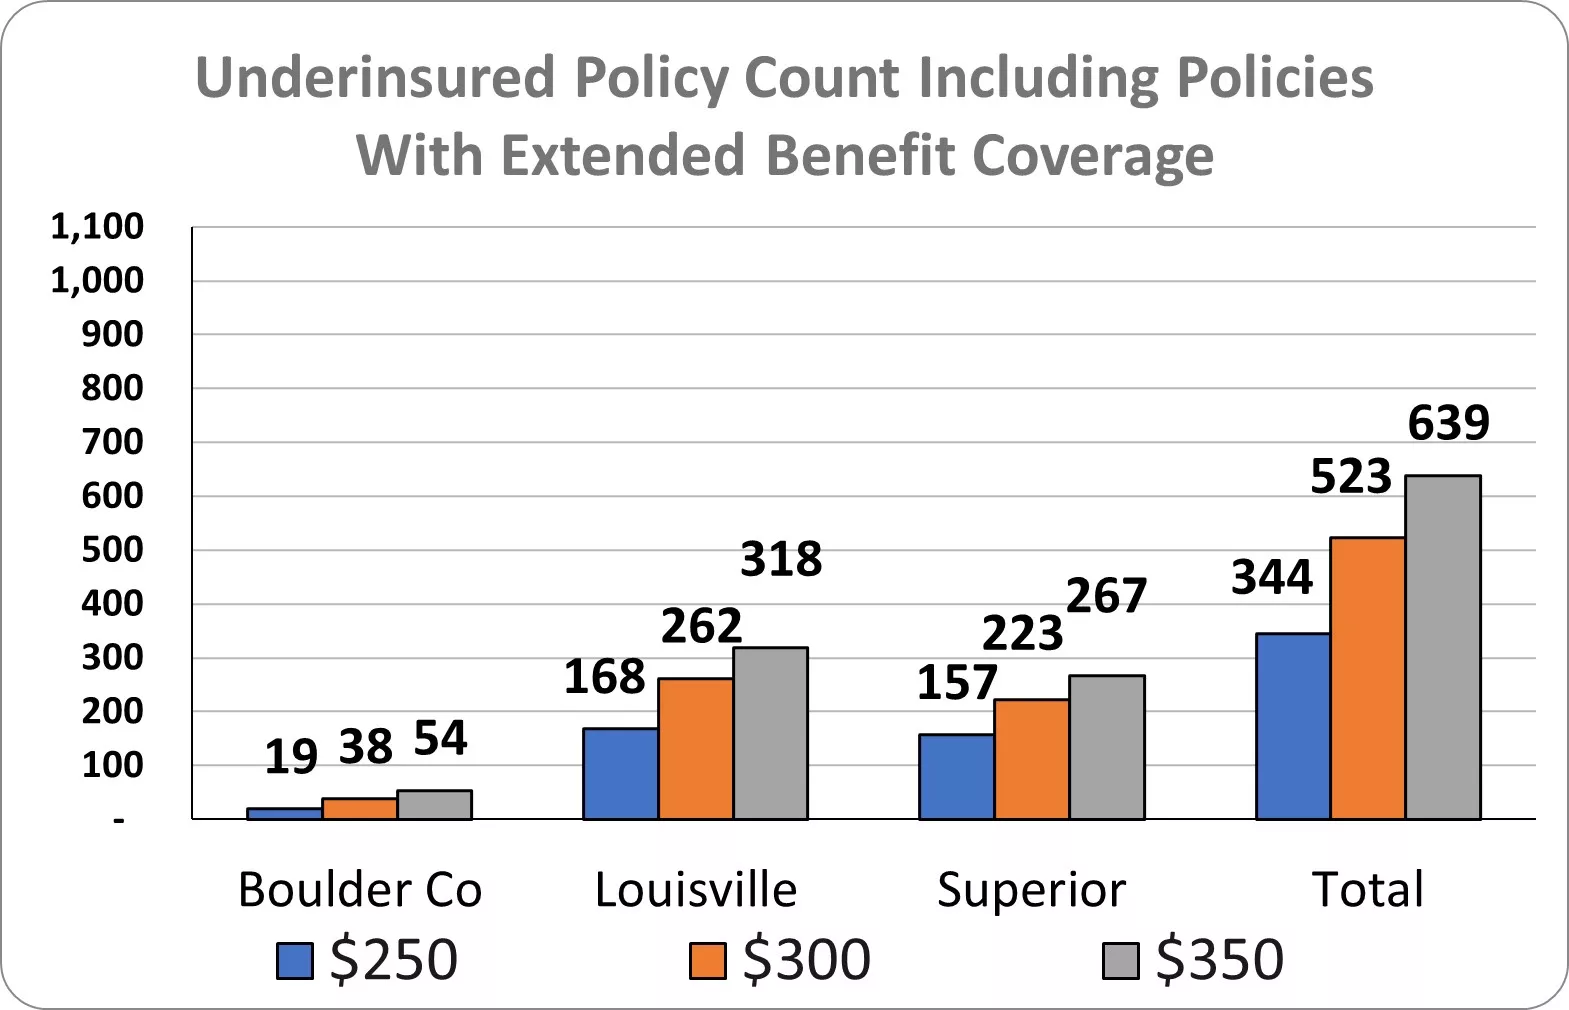 Number of Policies that are Underinsured (these include policies that have extended benefit coverage) - 344 policies at $250 per square foot rebuild; 523 policies at $300 per square foot rebuild; 639 policies at $350 per square foot rebuild